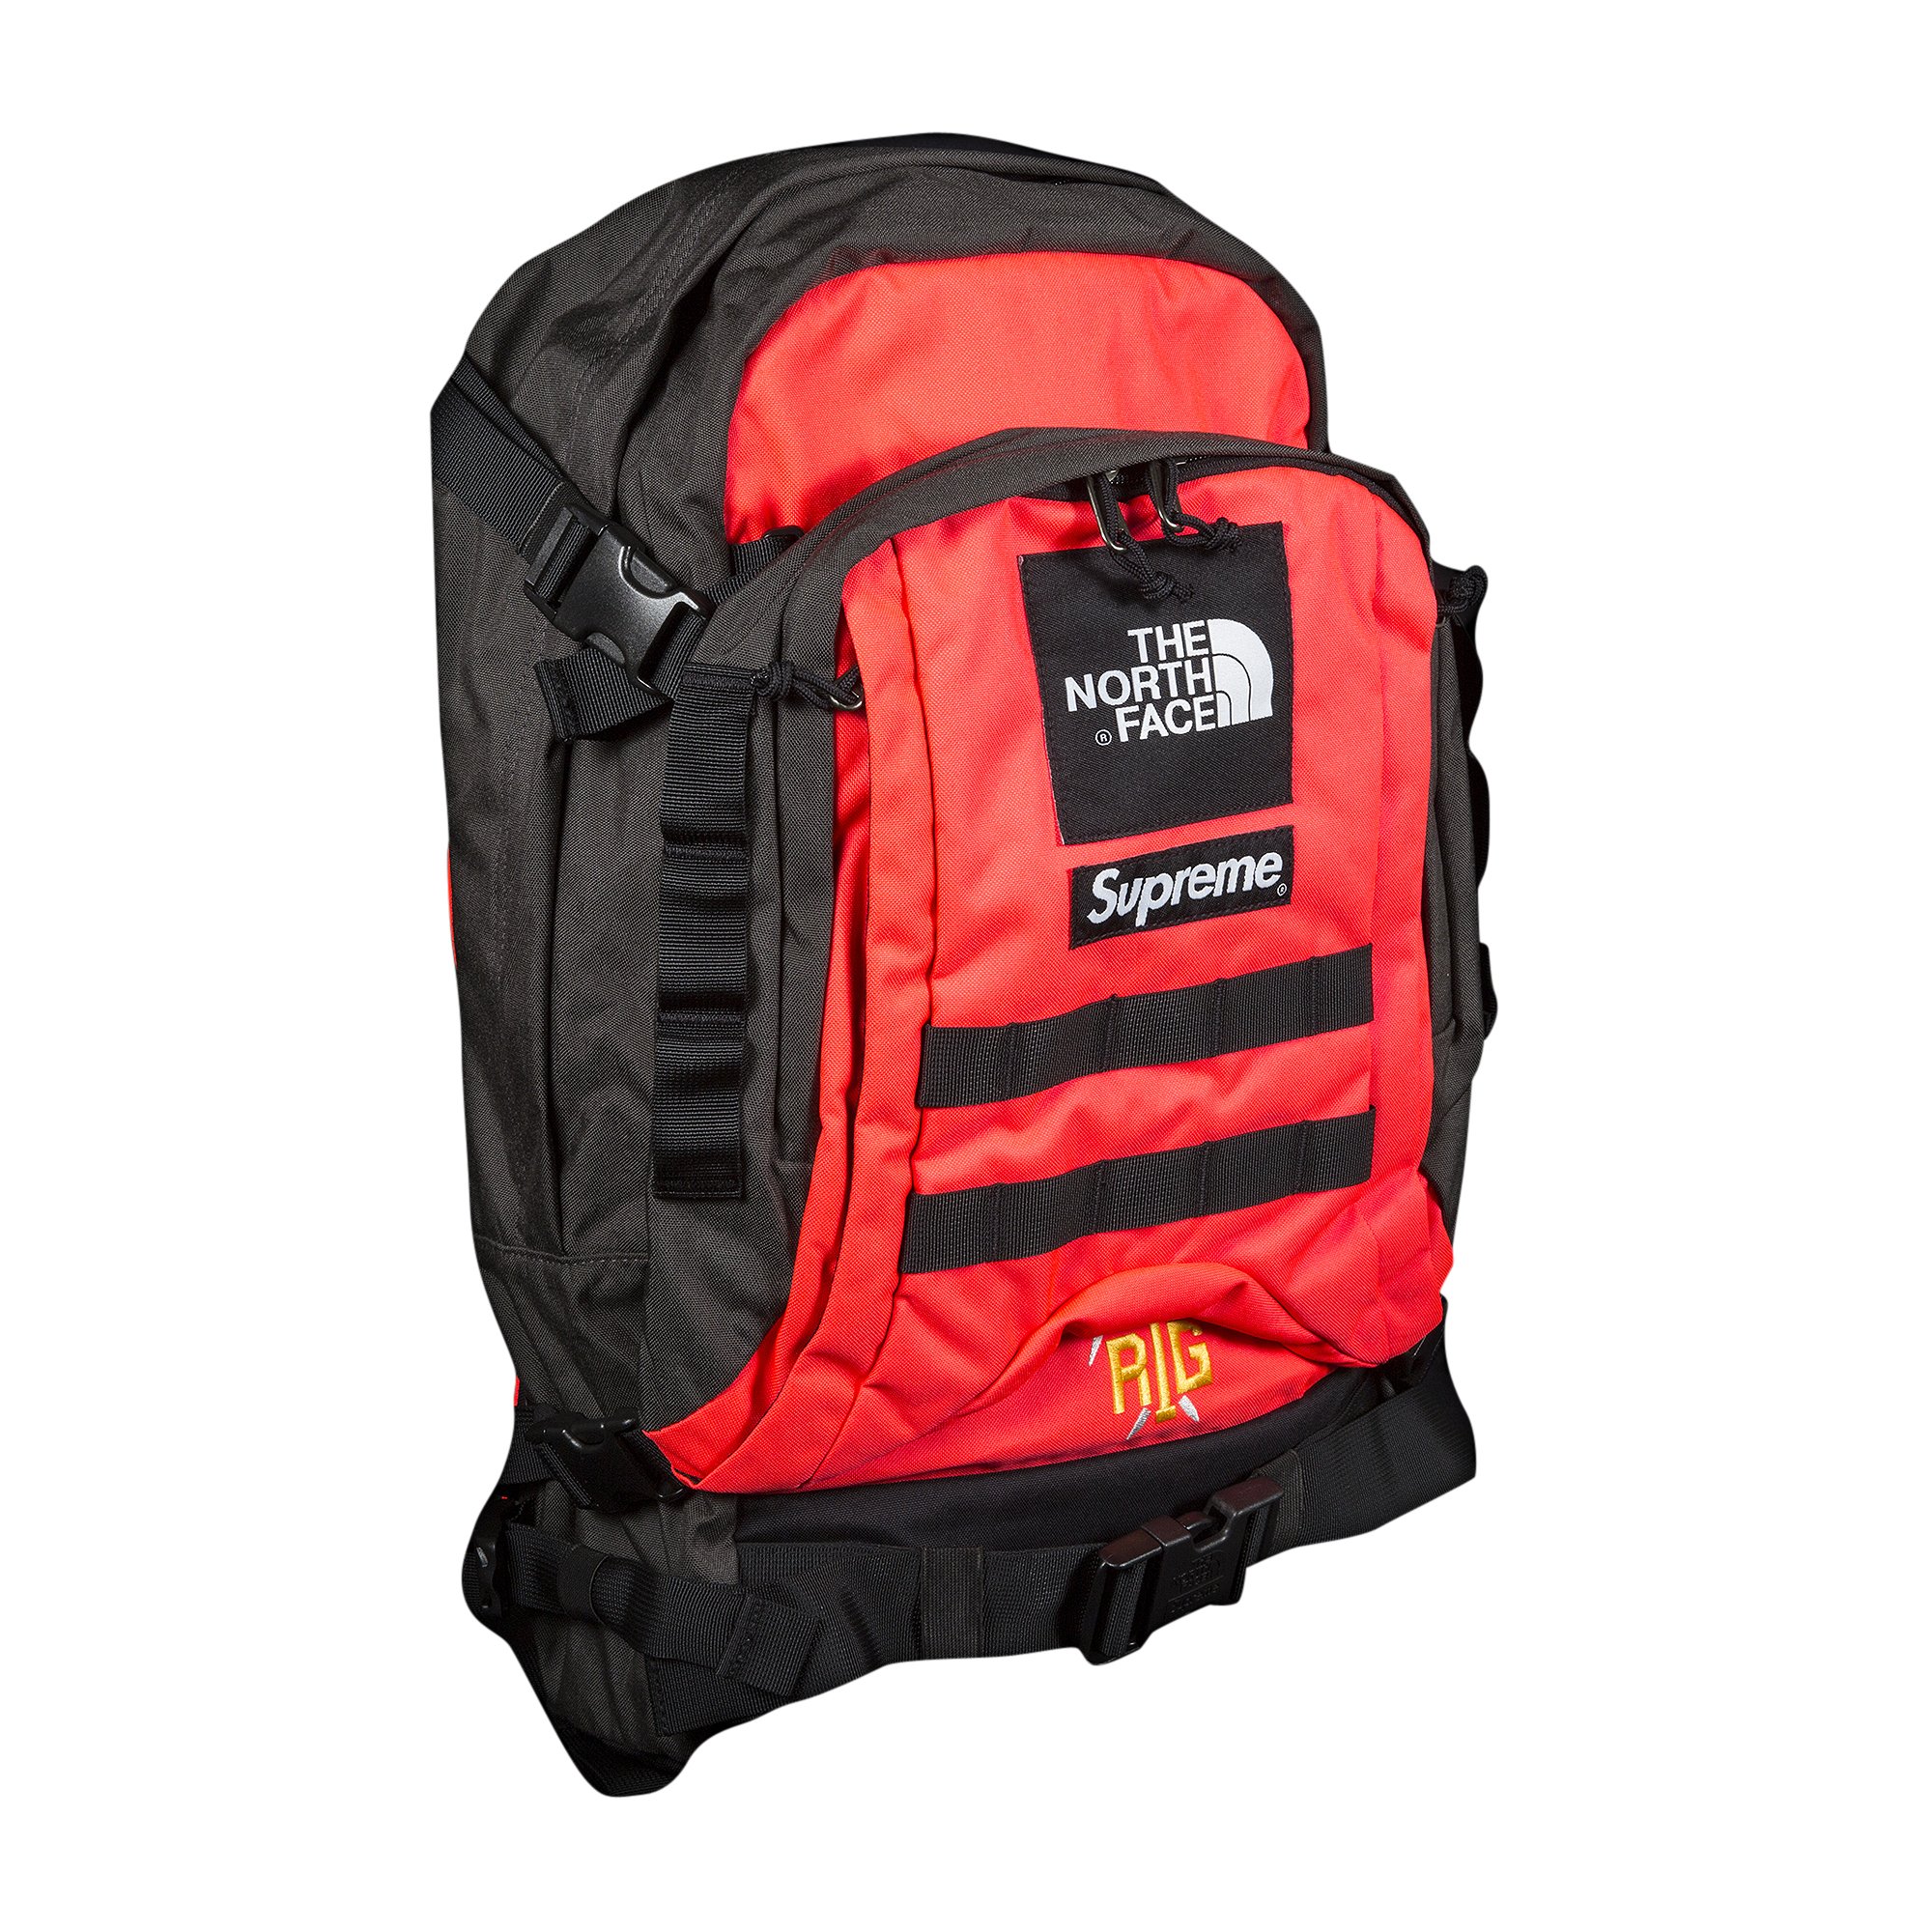 Supreme x The North Face RTG Backpack 'Bright Red'